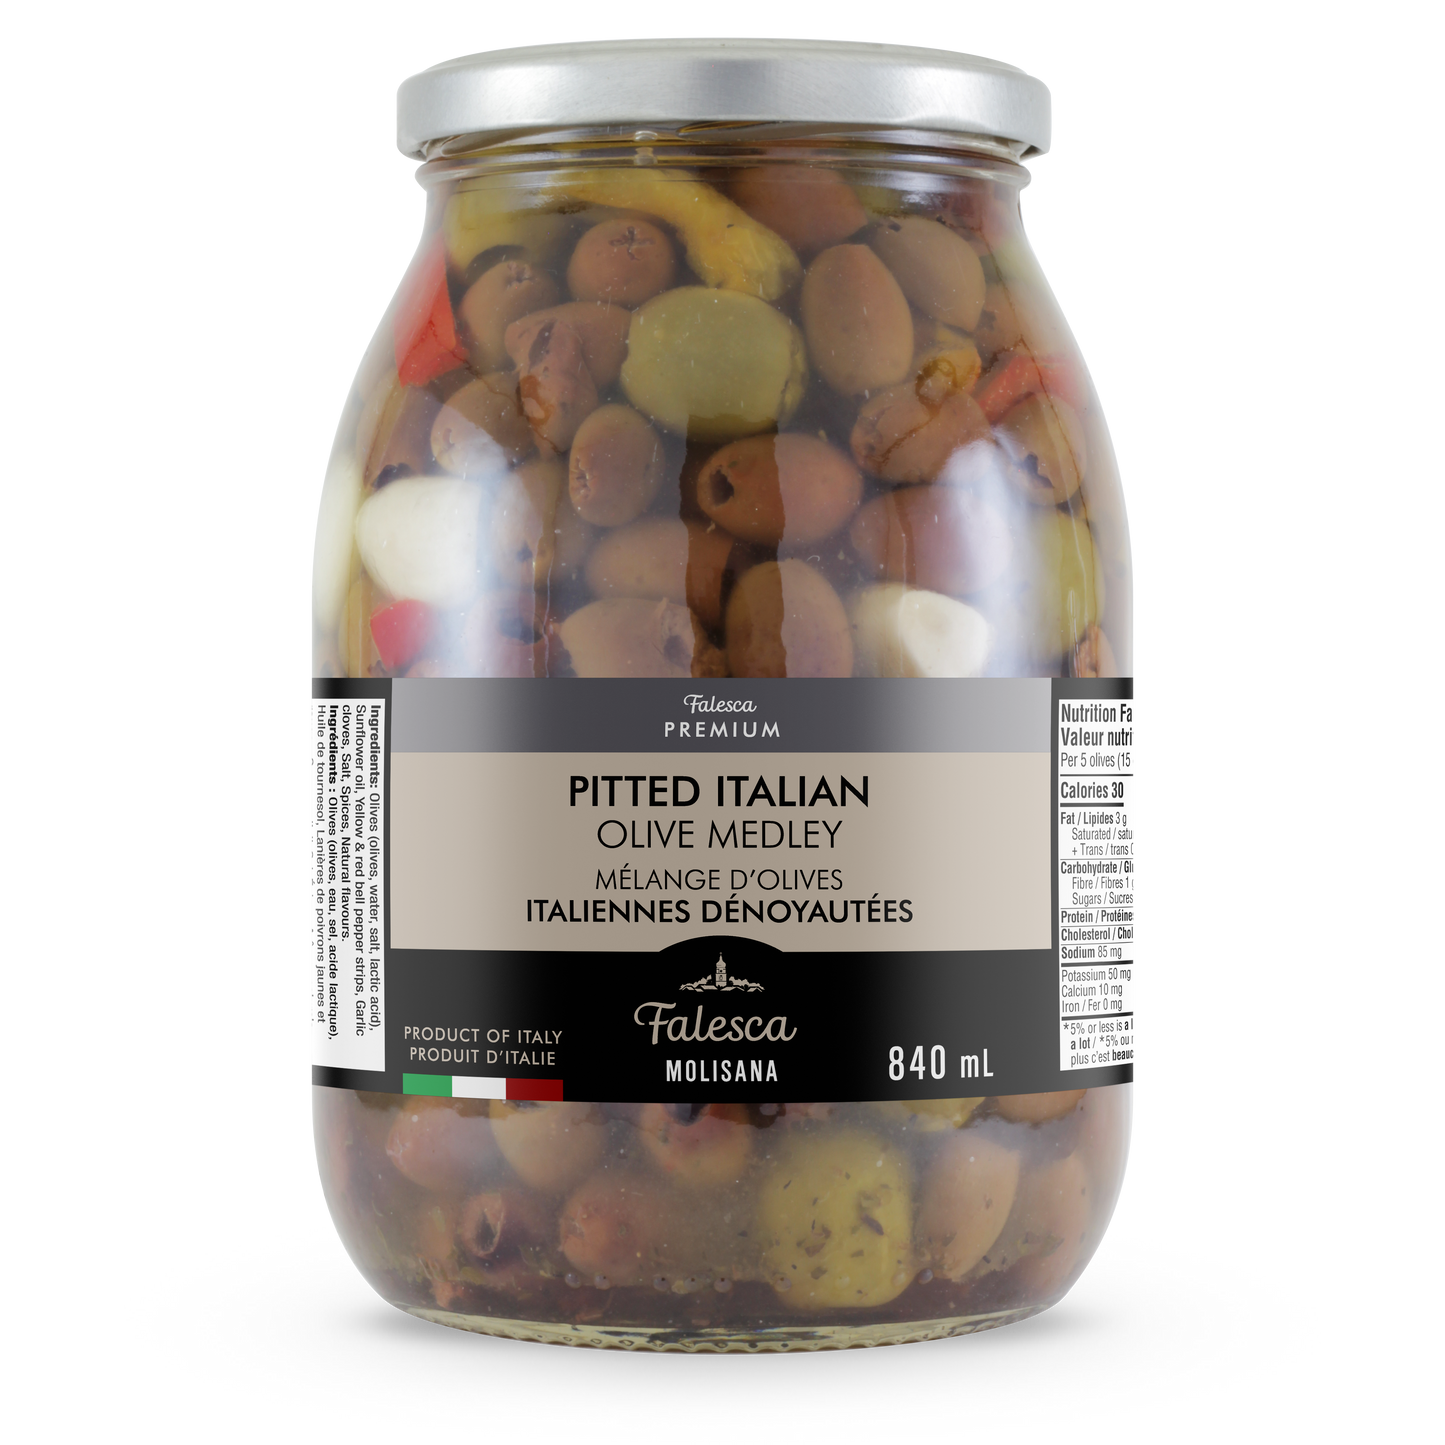 Pitted Italian Olive Medley